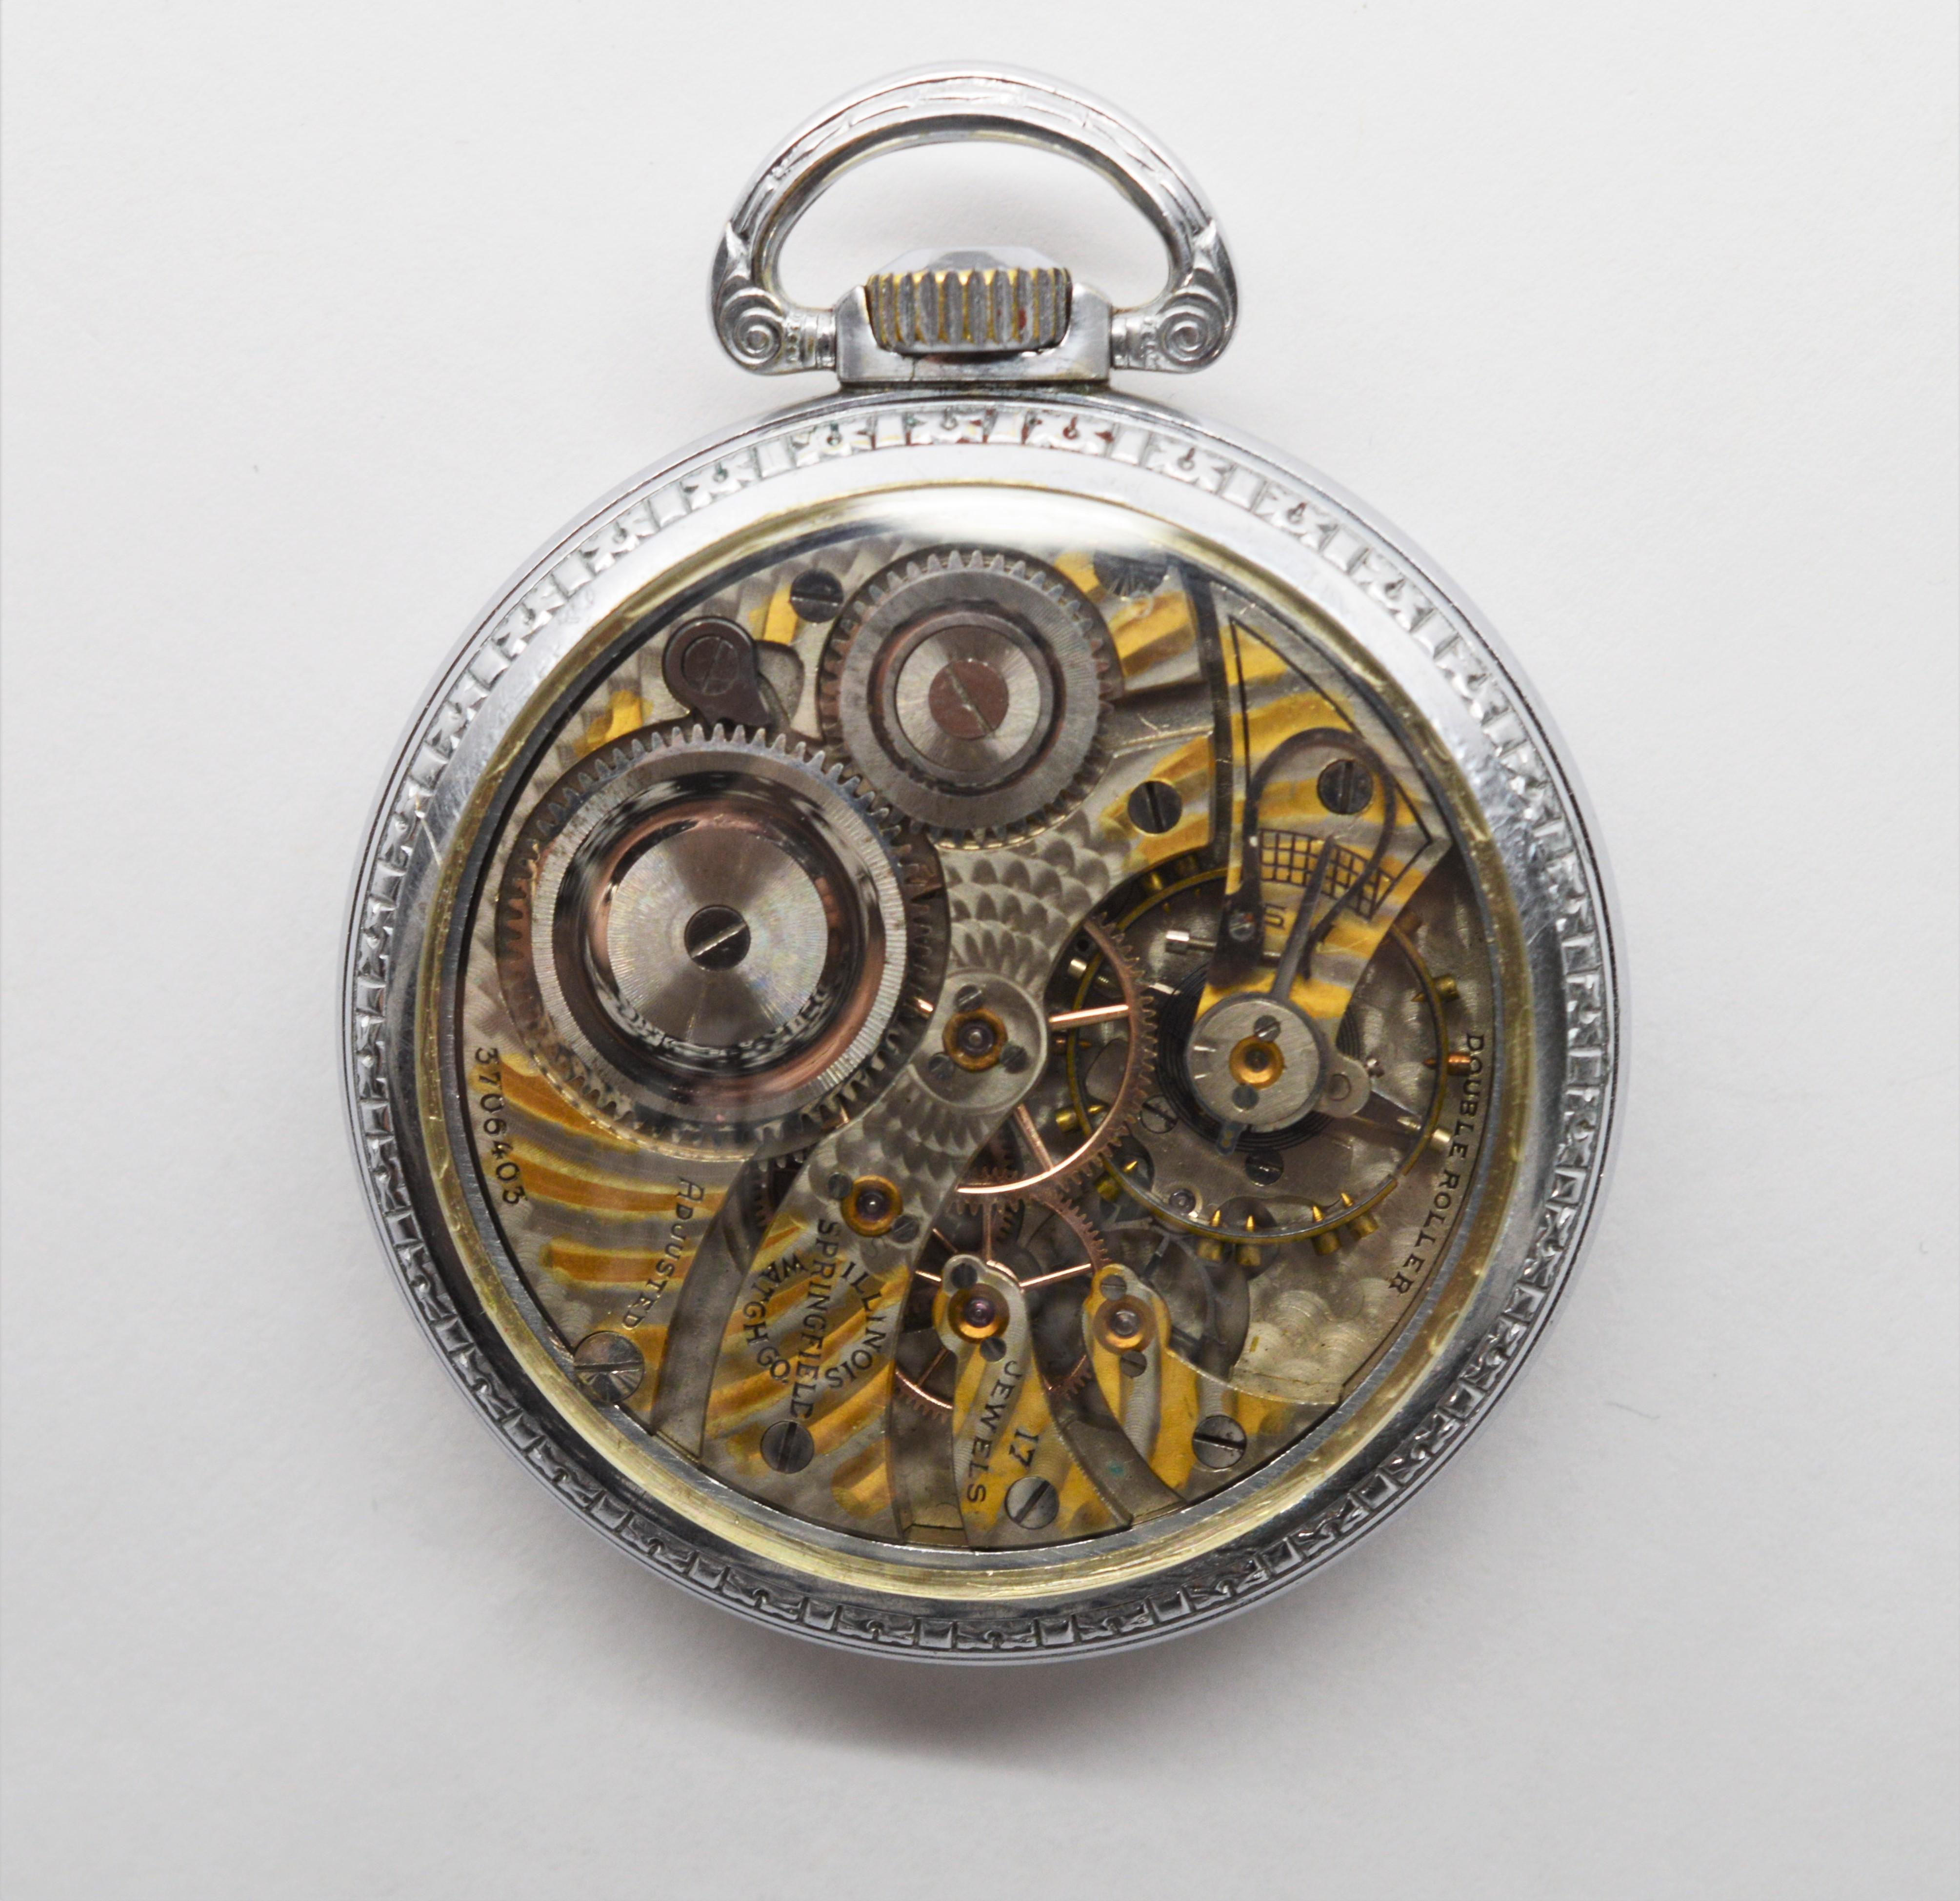 Illinois Steel Pocket Watch with Display Back 1